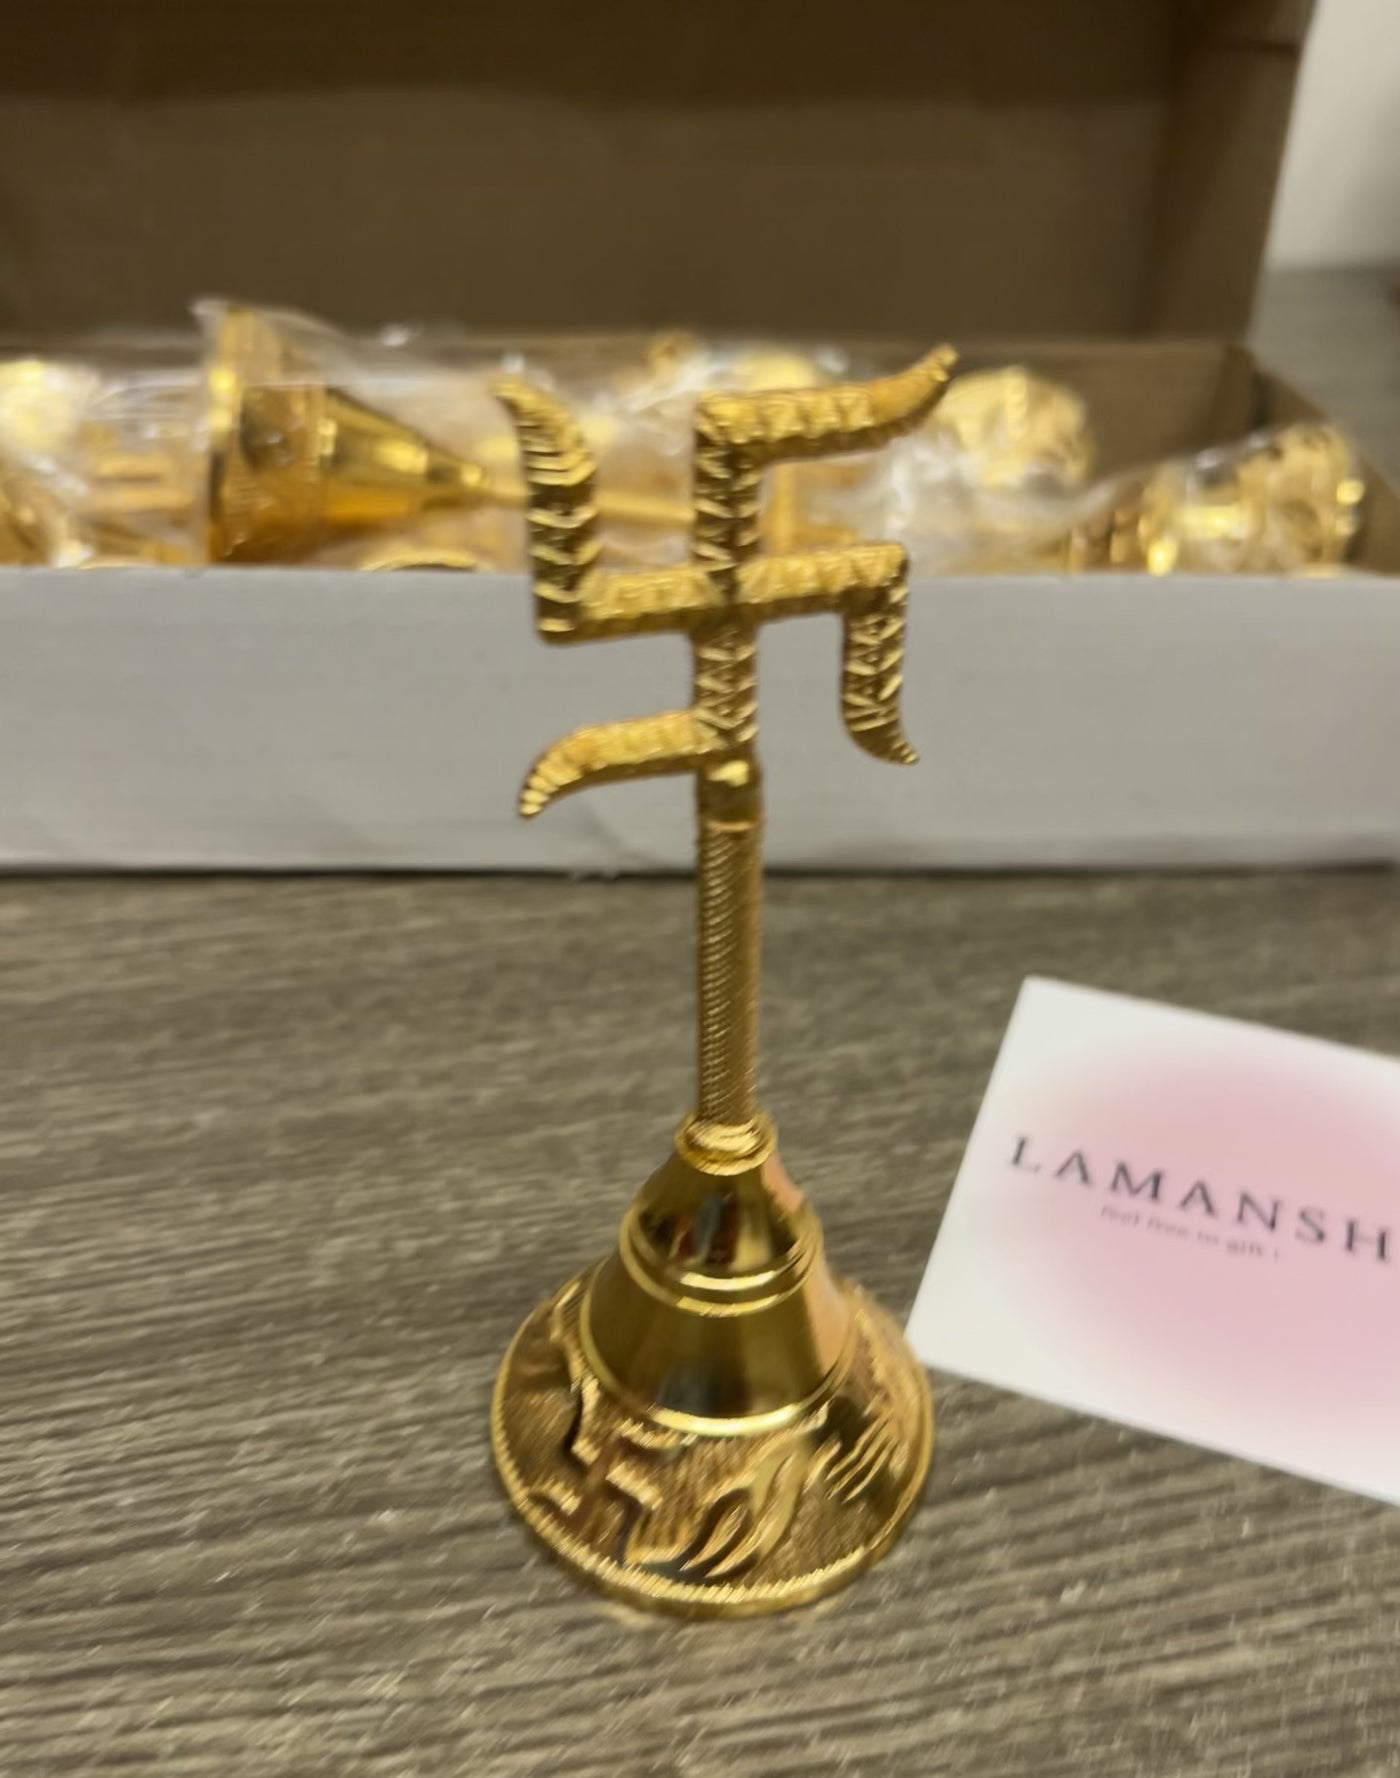 LAMANSH Golden Swastik Bells 🔔Ghanti for Puja Mandir or mangal path ceremony giveaways | Bells for welcome in weddings / Return gifts 🎁 for puja ceremony